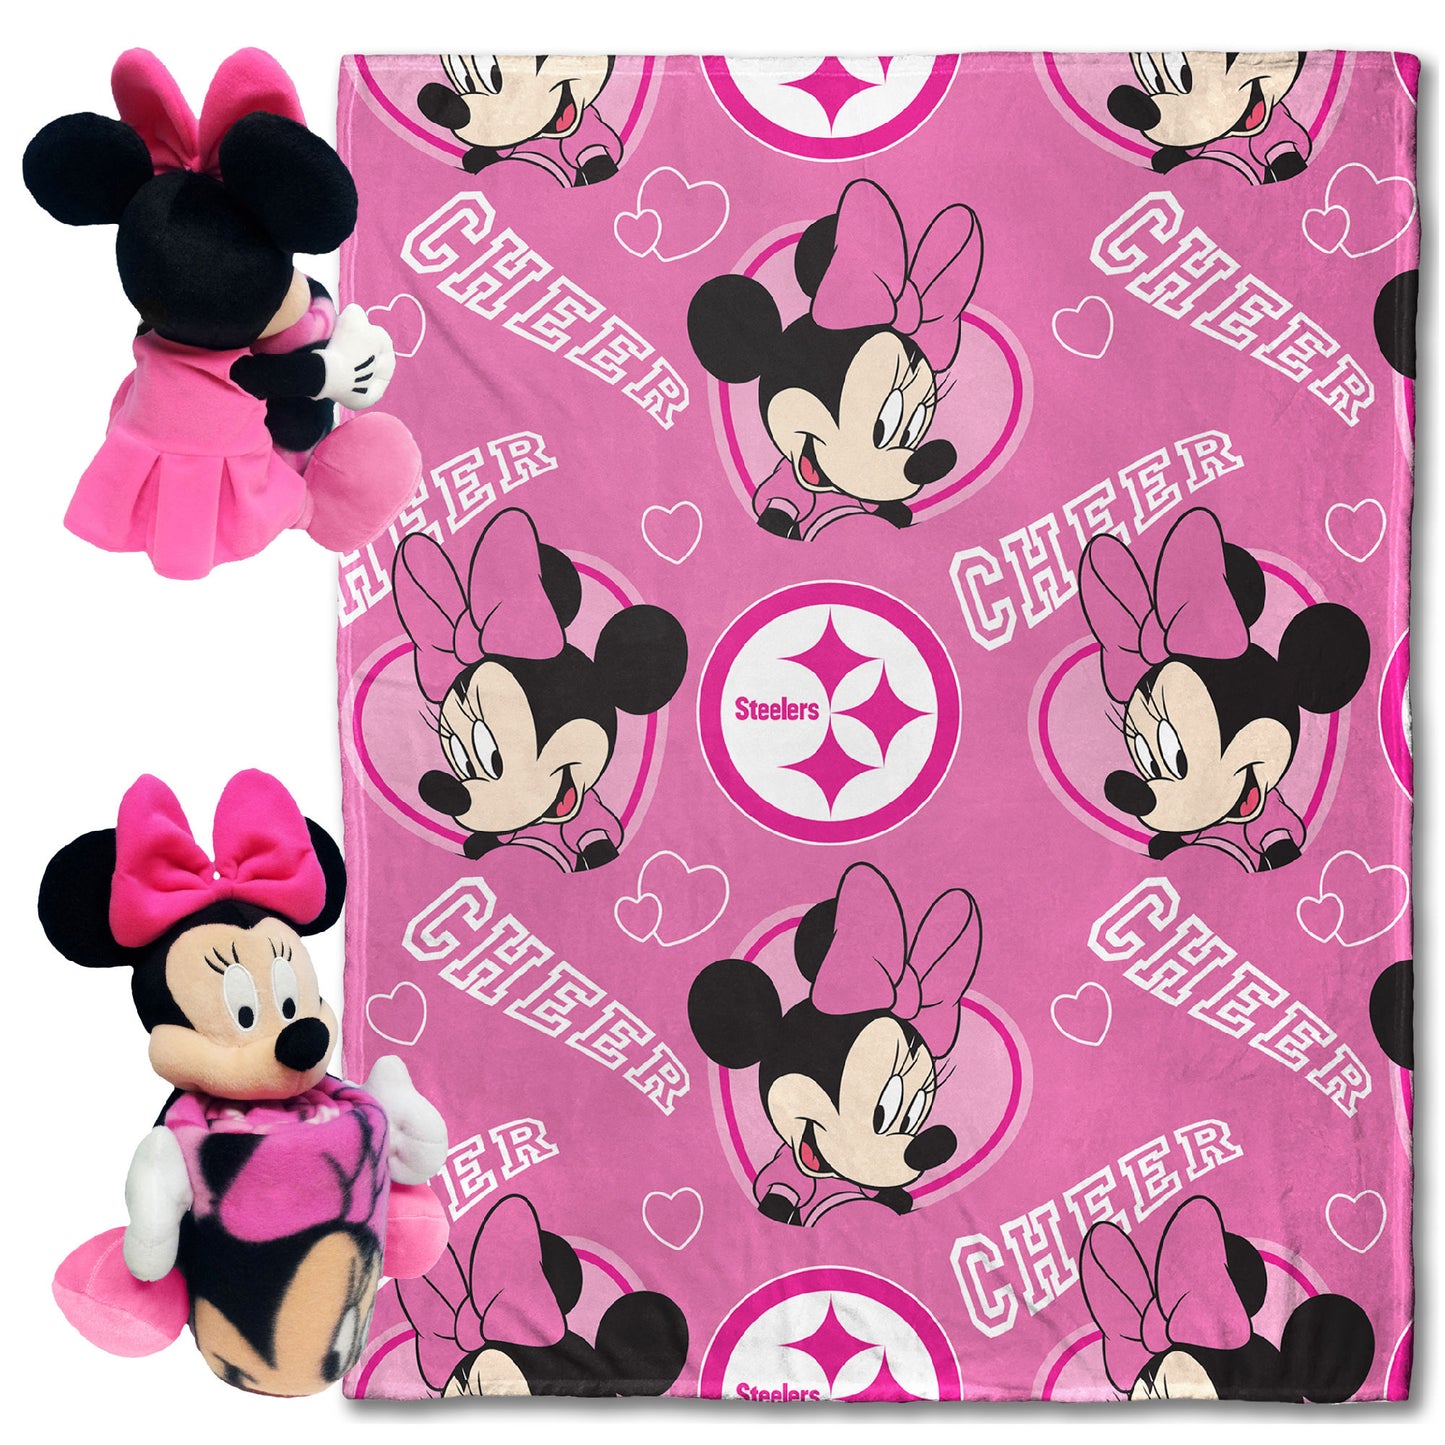 NFL - COB 312 Steelers OFFICIAL NFL & Disney's Minnie Mouse Character Hugger Pillow & Silk Touch Throw Set;  40" x 50"